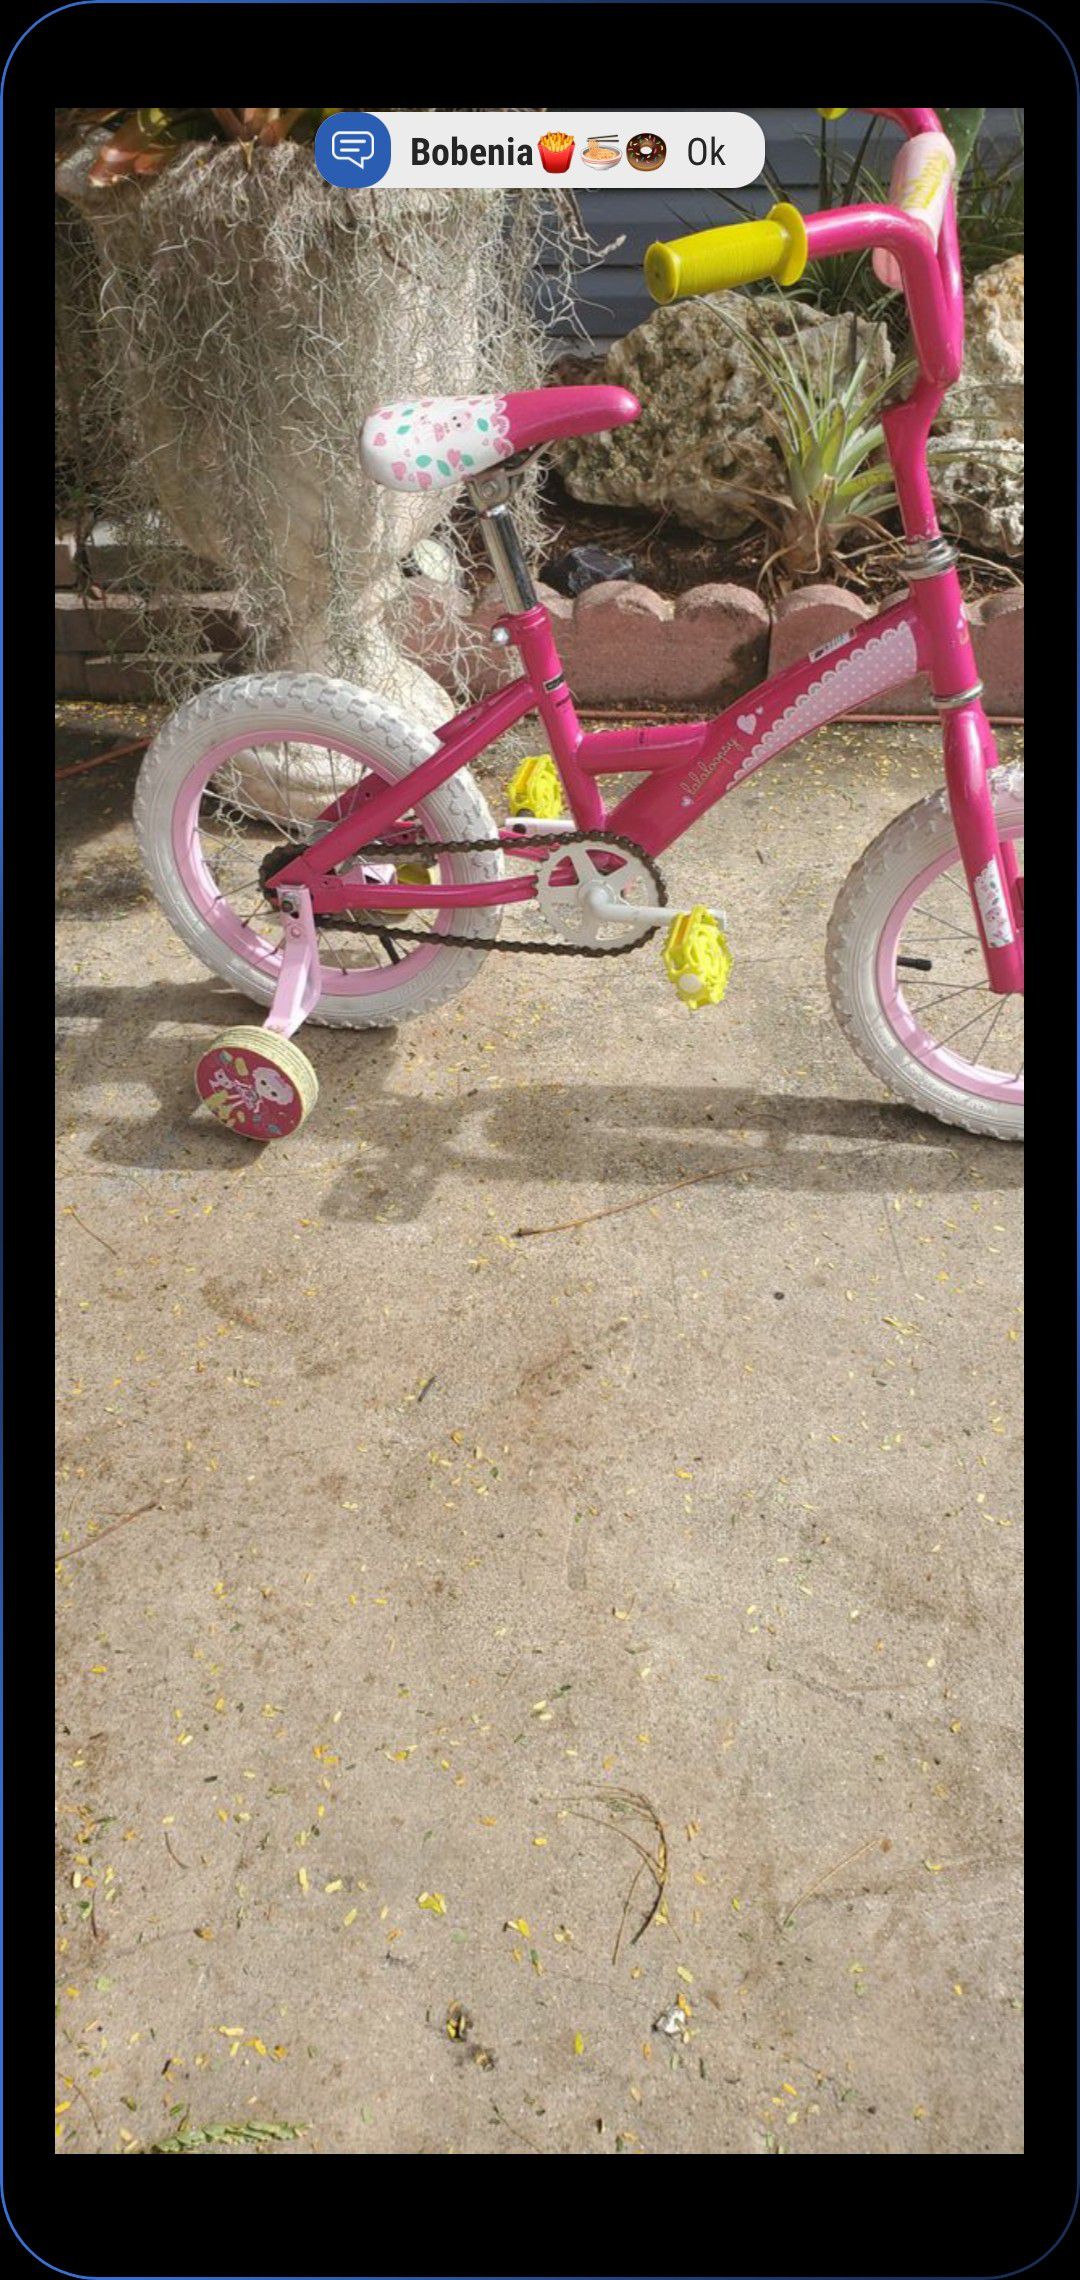 14 inch girls bike bicycle bicicleta lalaloopsy...ready to ride and play.... located on krome and sw 200st